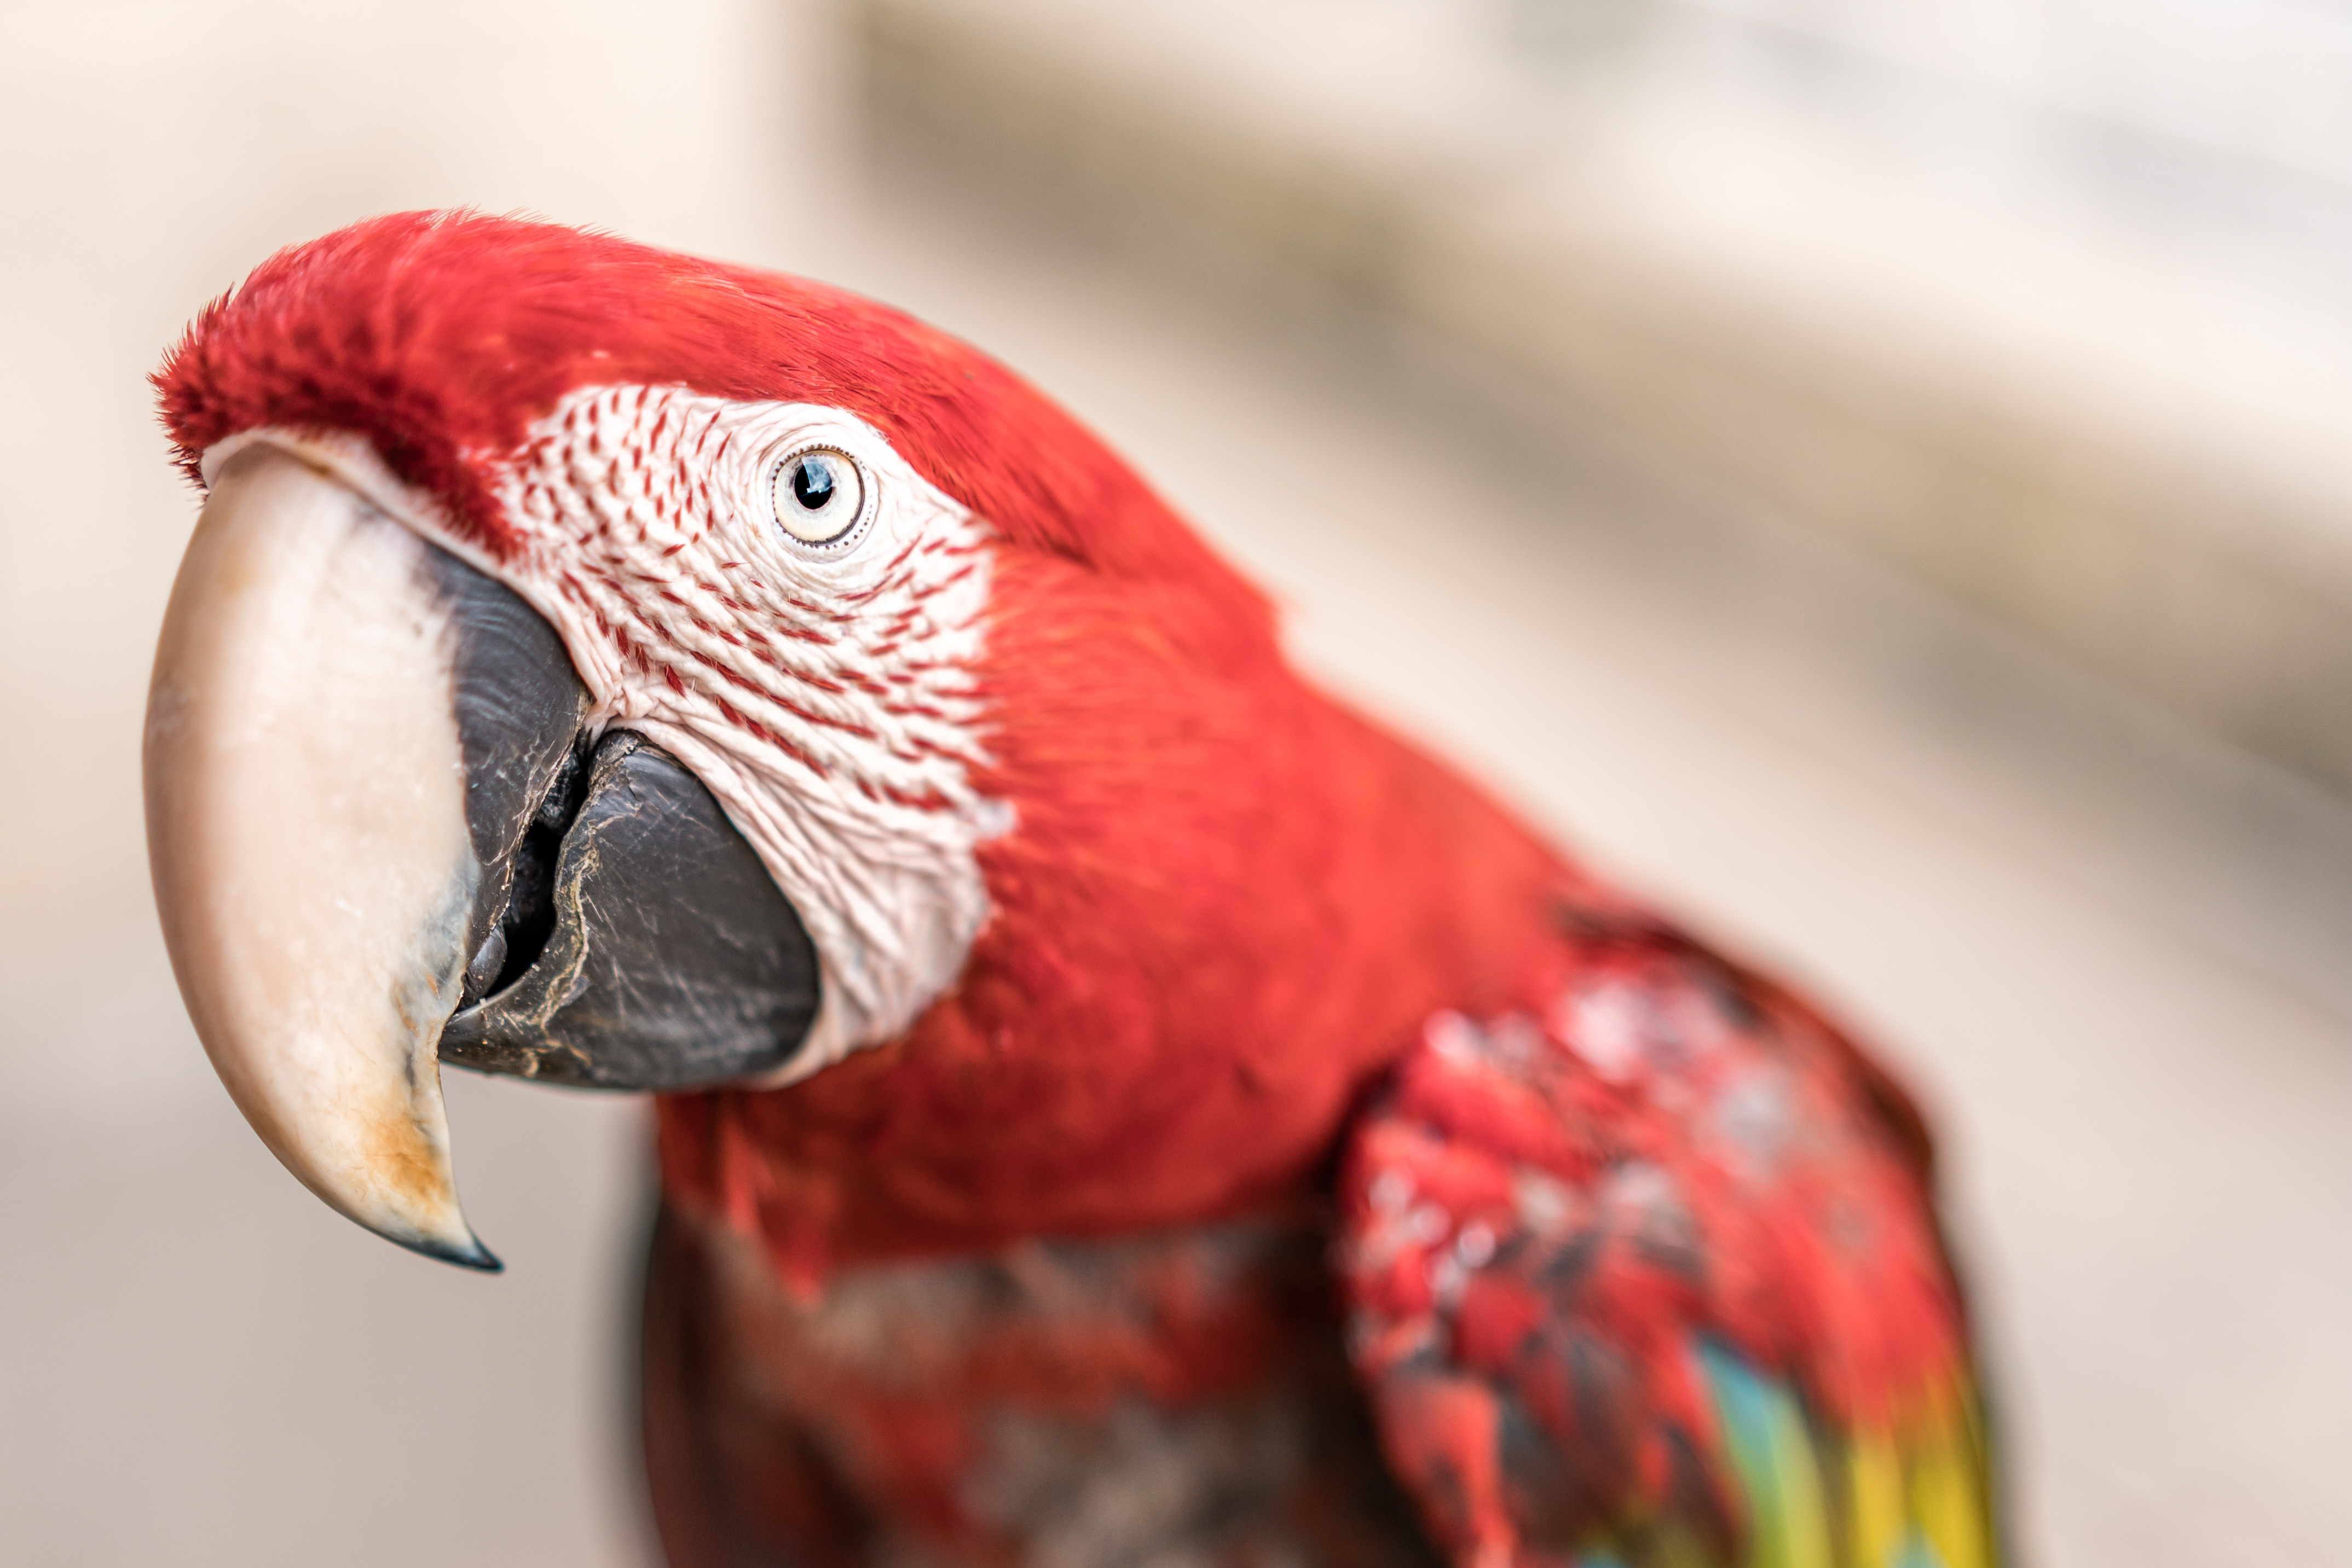 This week Sean helps a reader with a shy rescue parrot